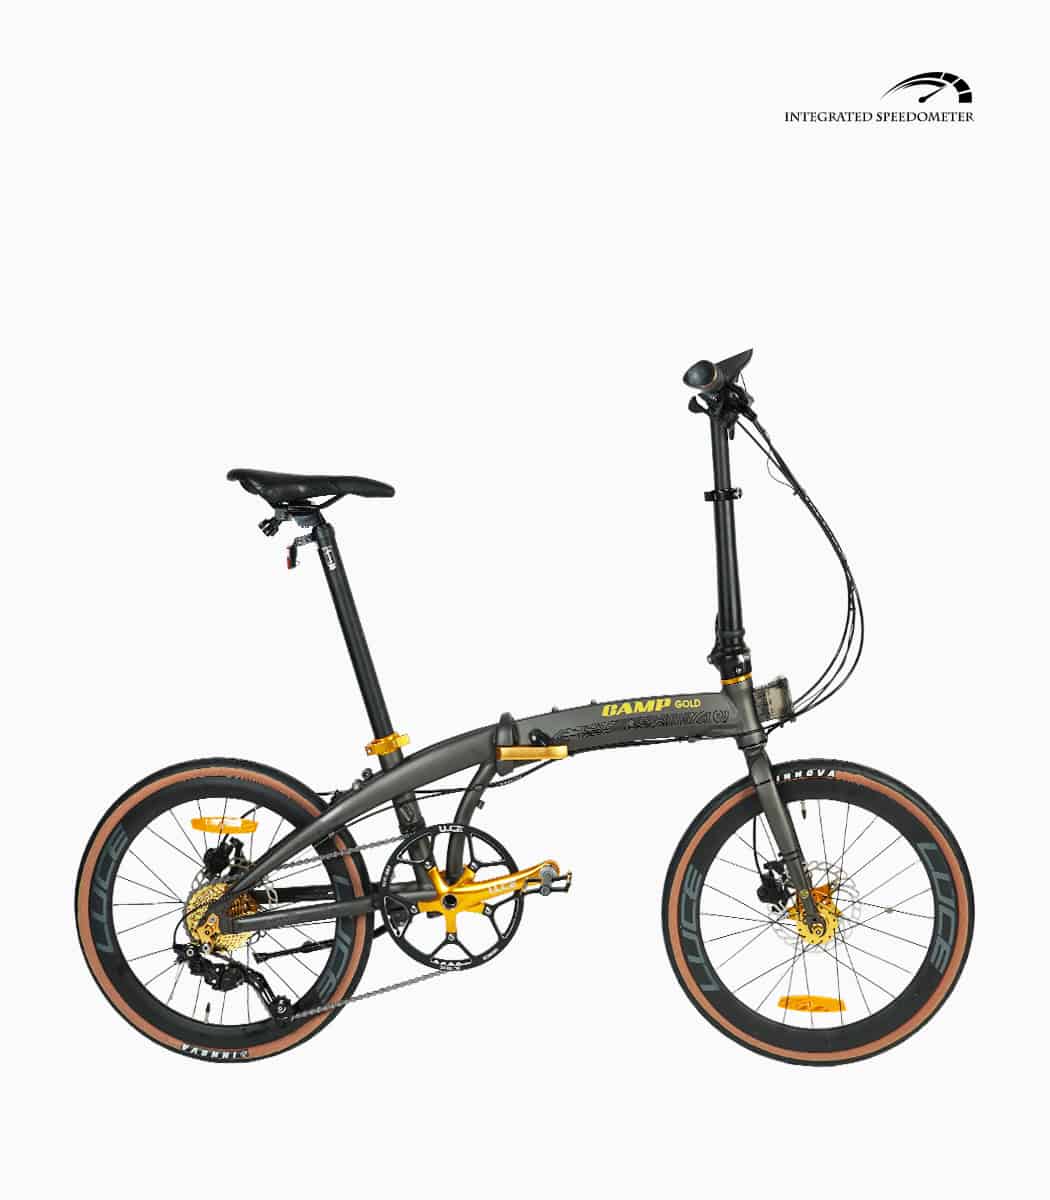 CAMP GOLD Sport (MATT GREY) foldable bicycle with speedometer right